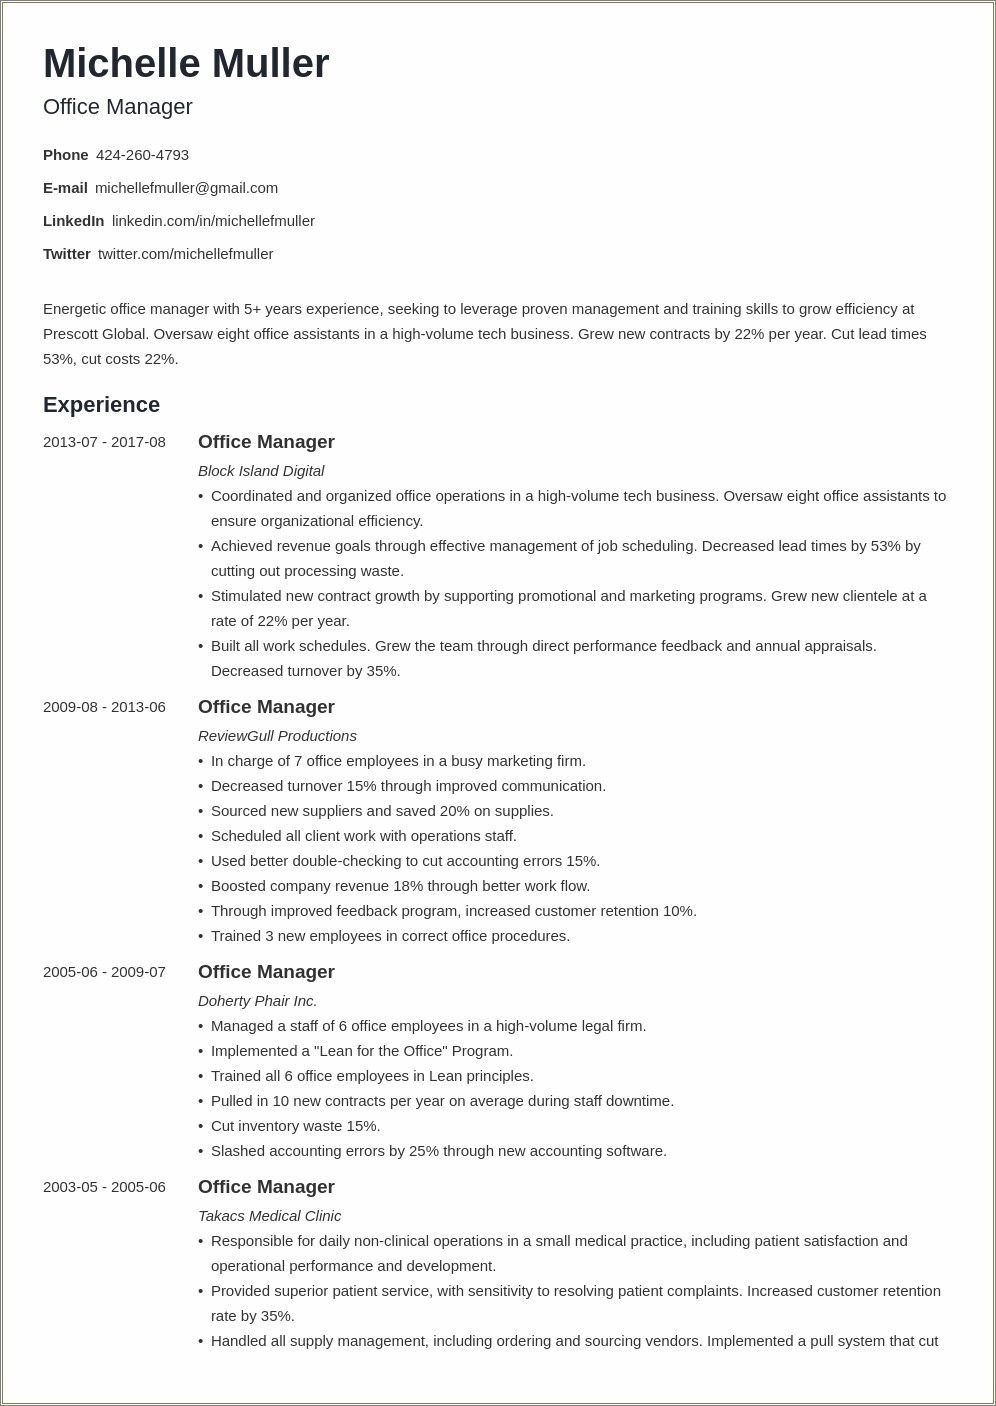 2 Jobs At The Same Time On Resume